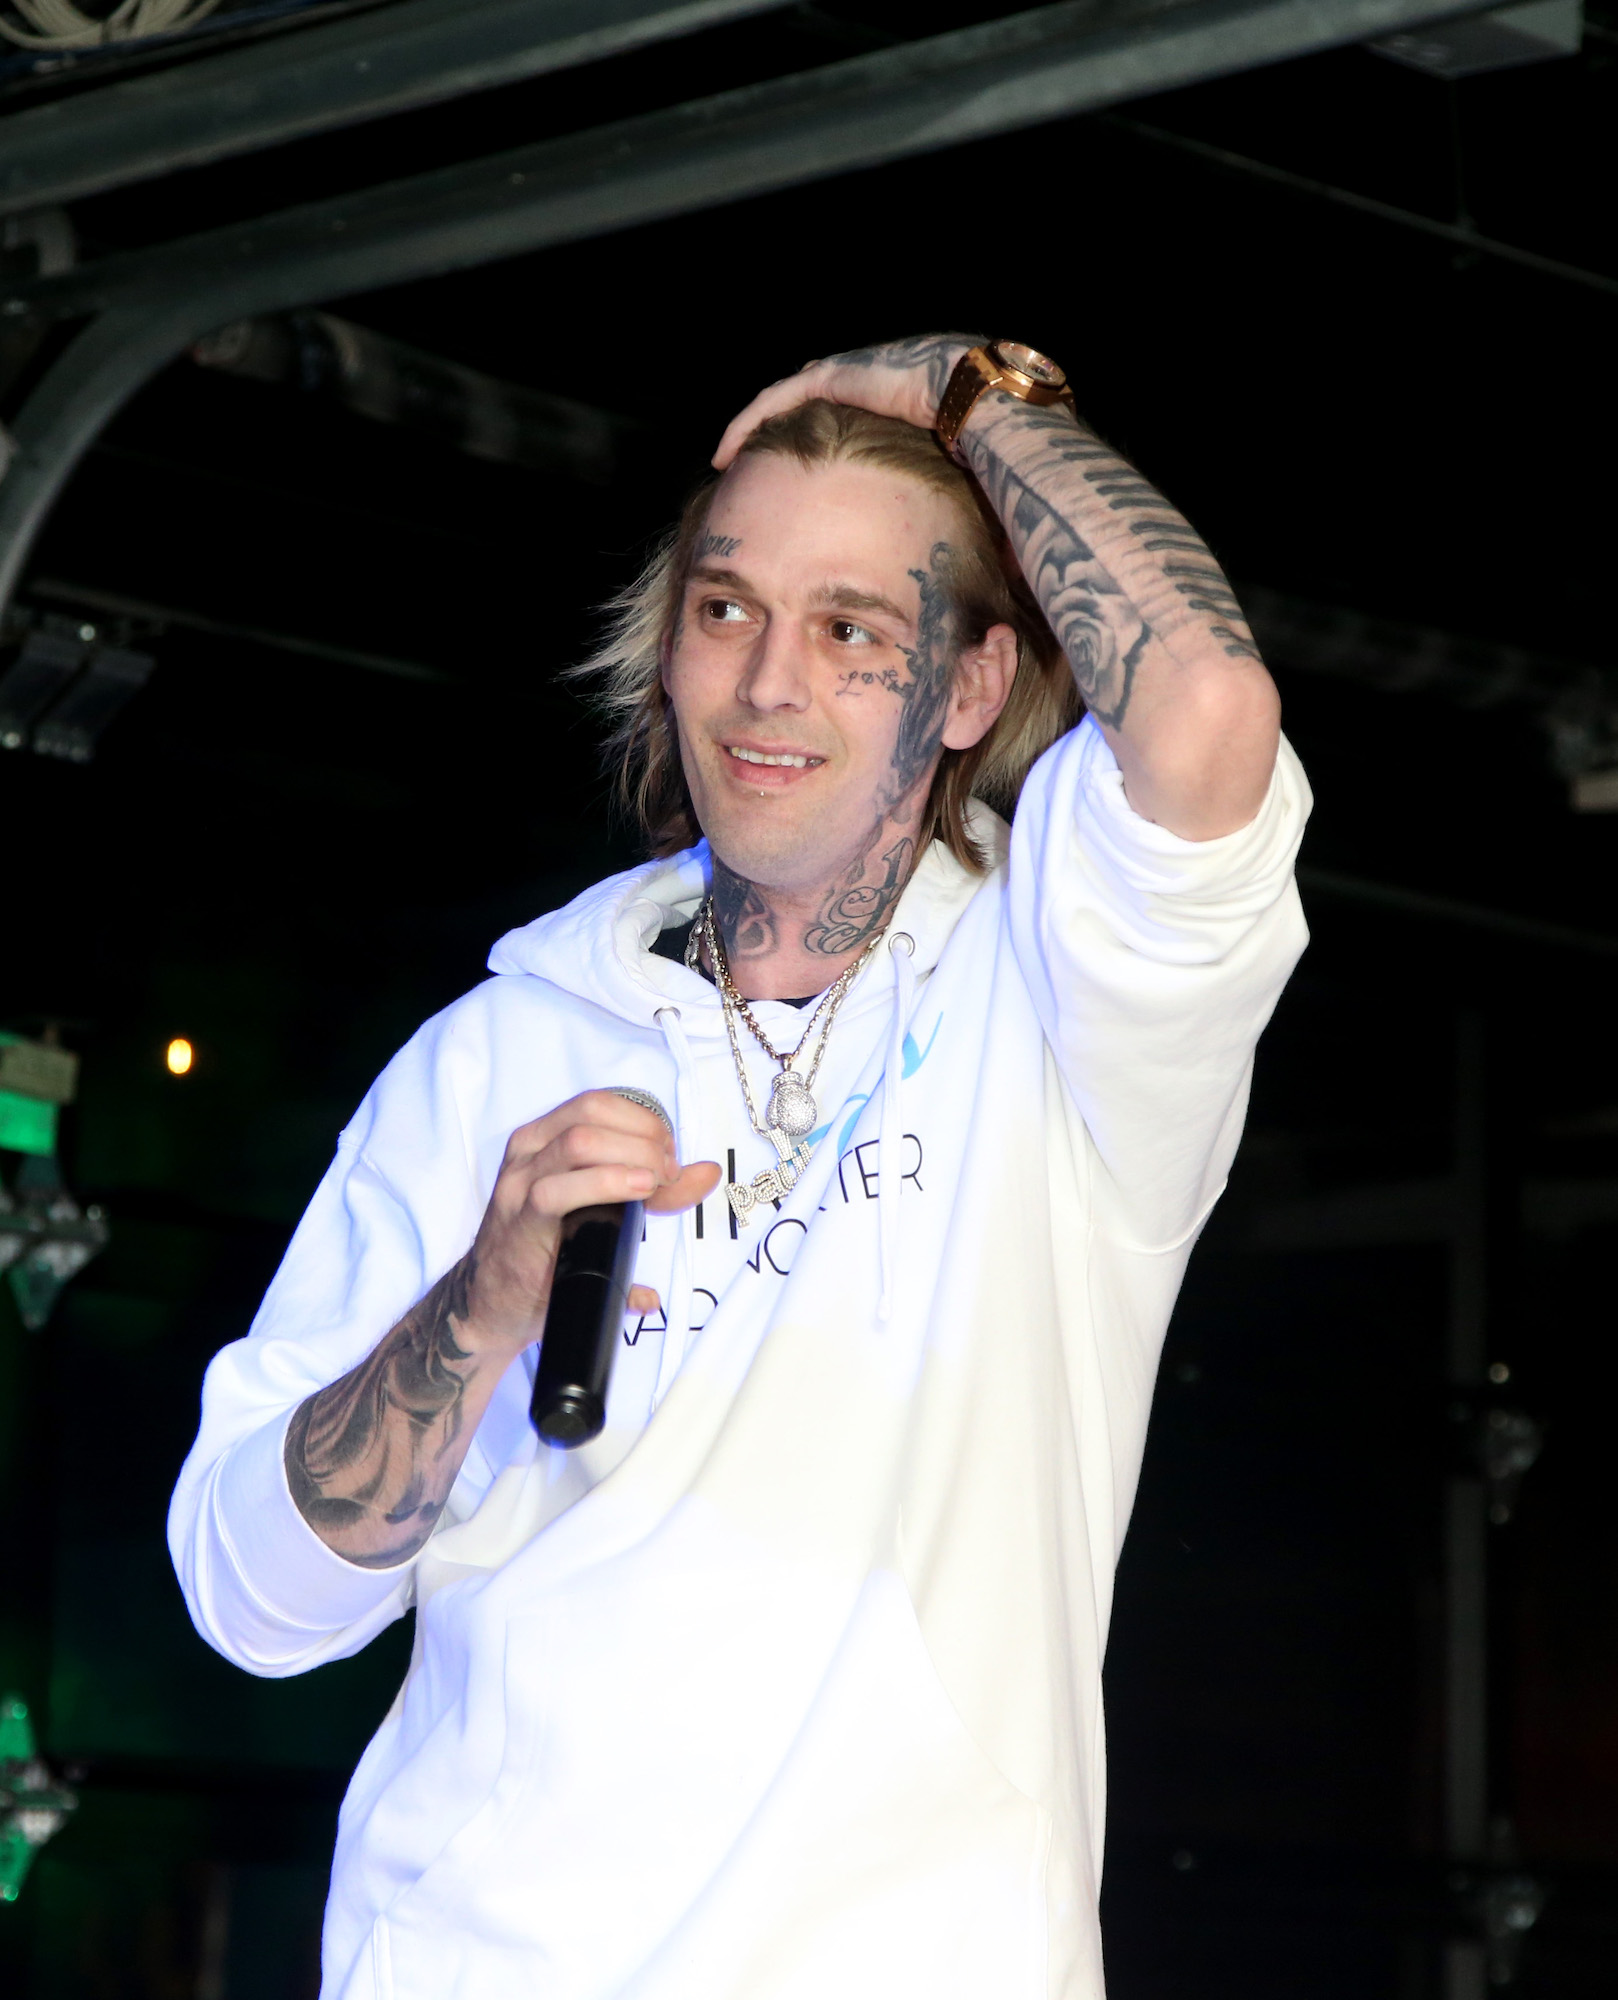 New Music from the Late Aaron Carter is On the Way